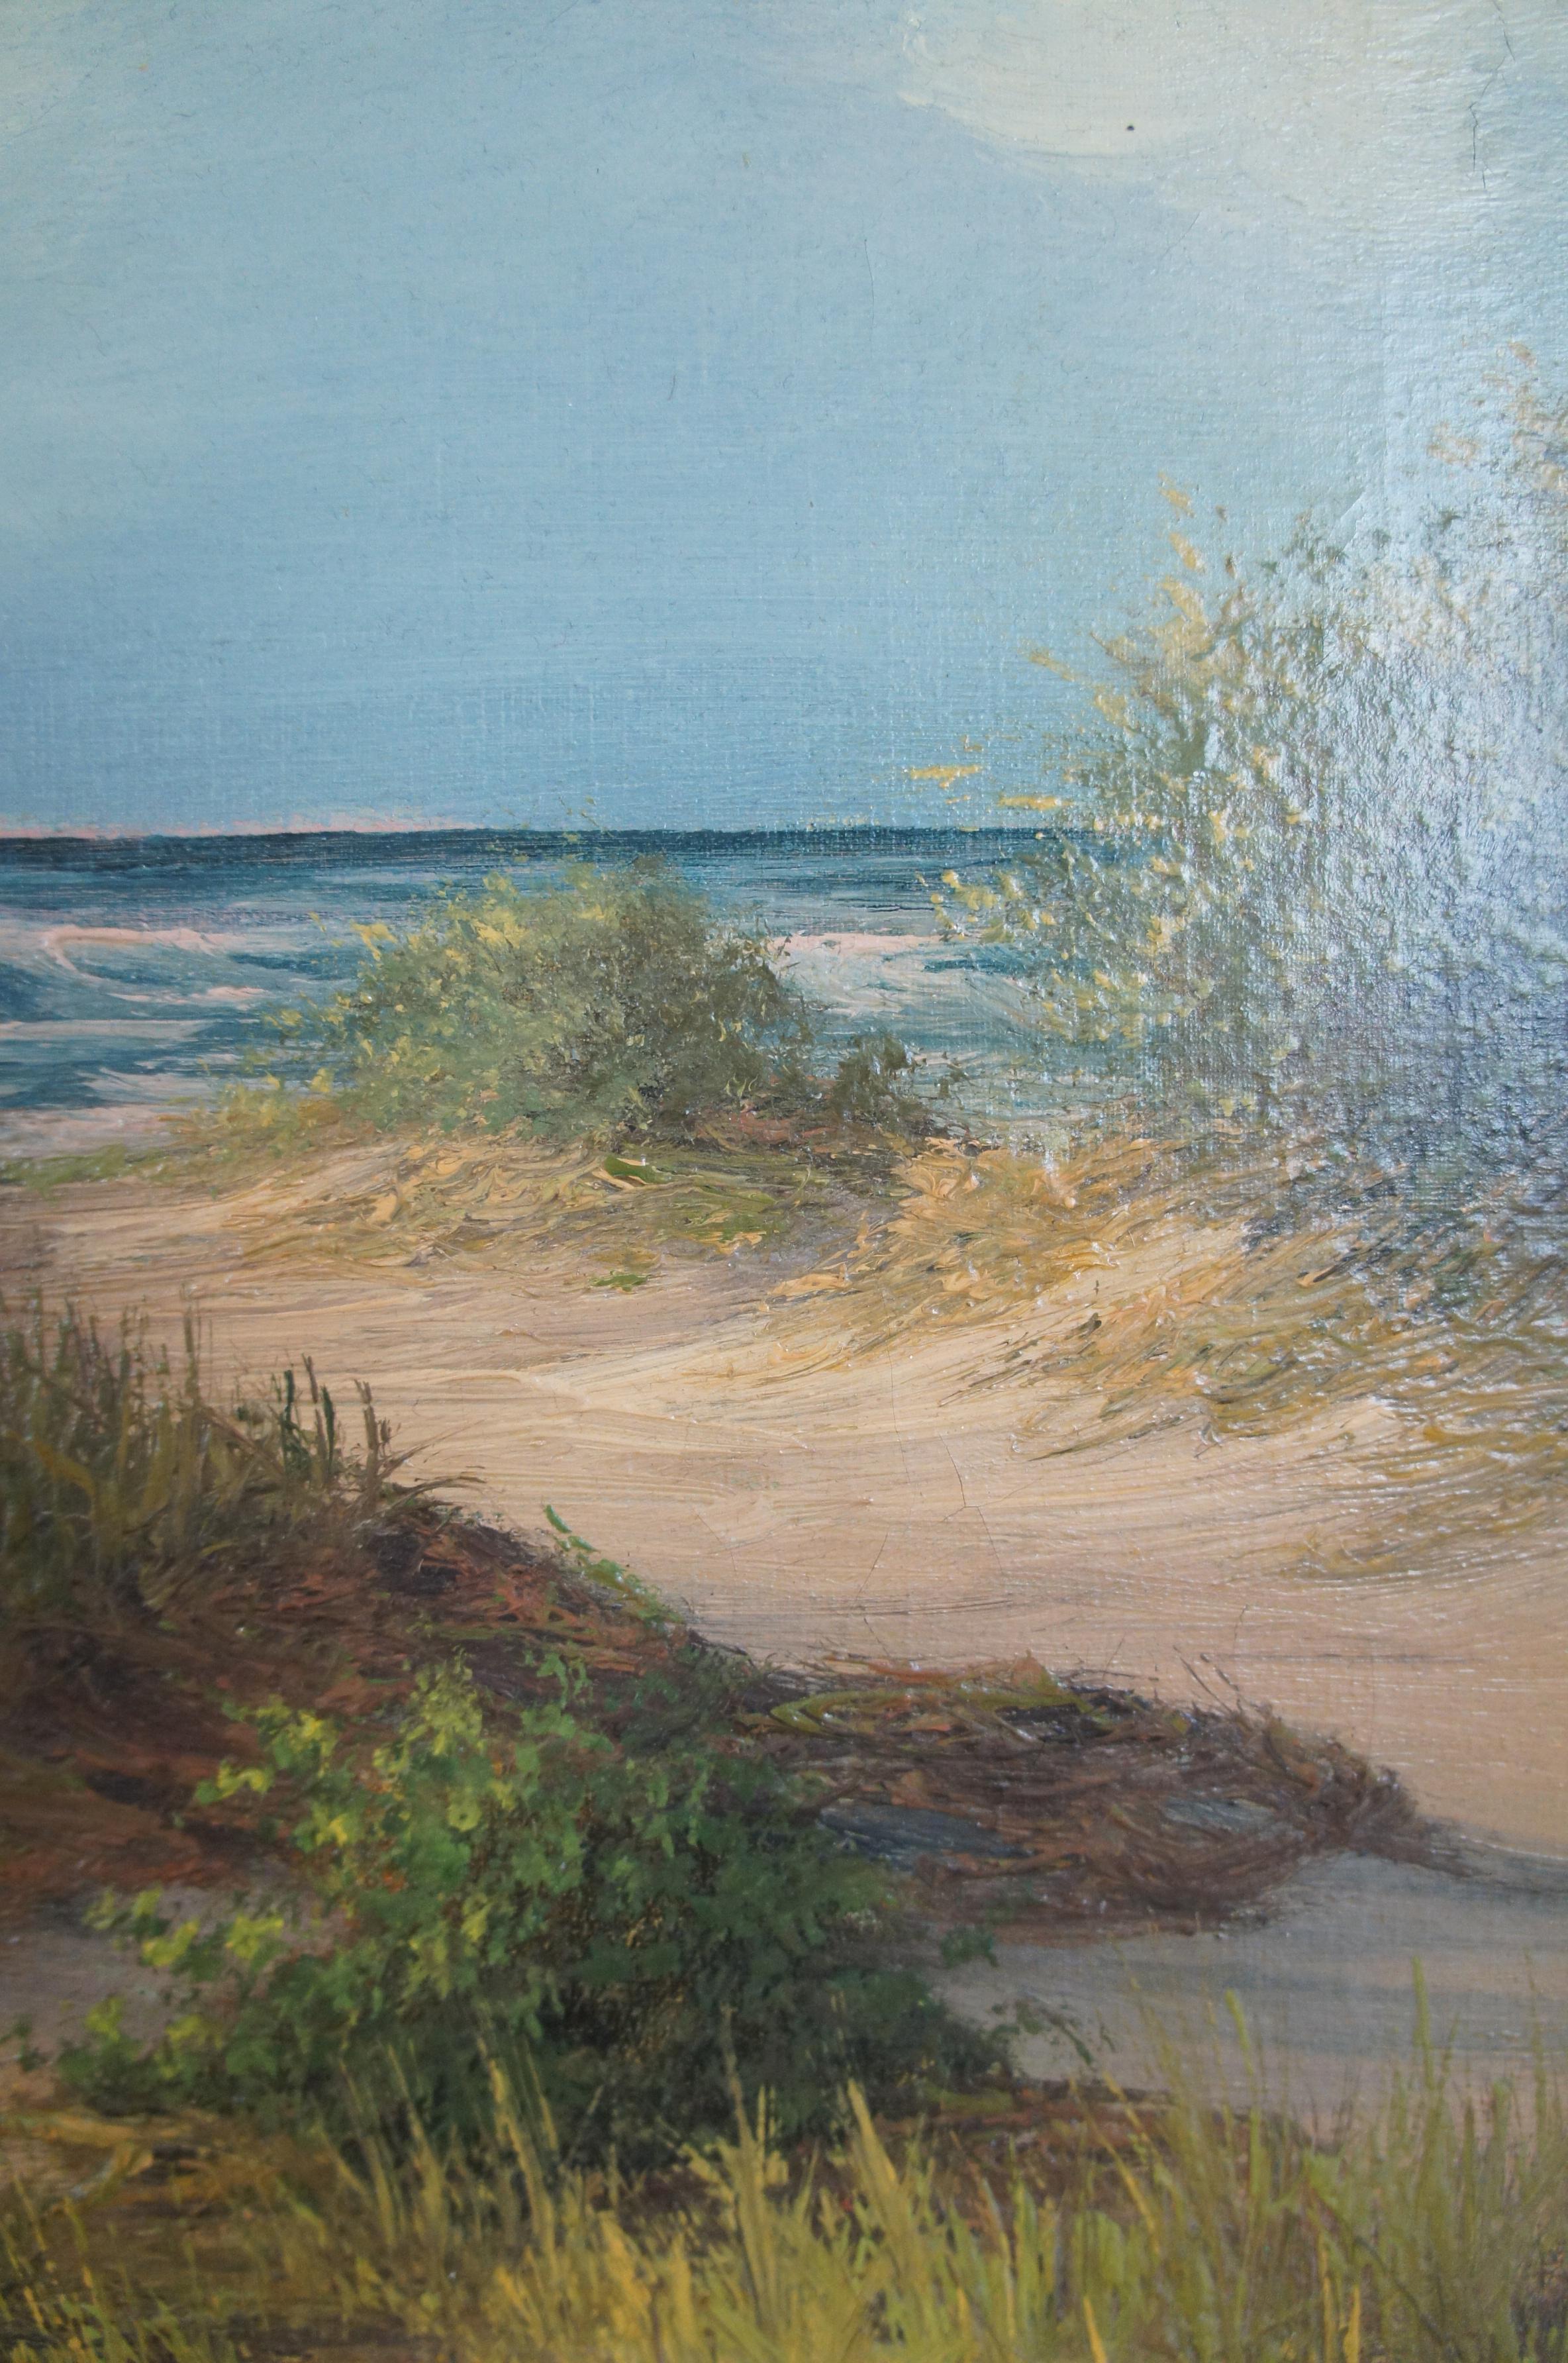 Expressionist M. Charles Donald Leary Beach Dunes Ocean Landscape Oil Painting on Canvas